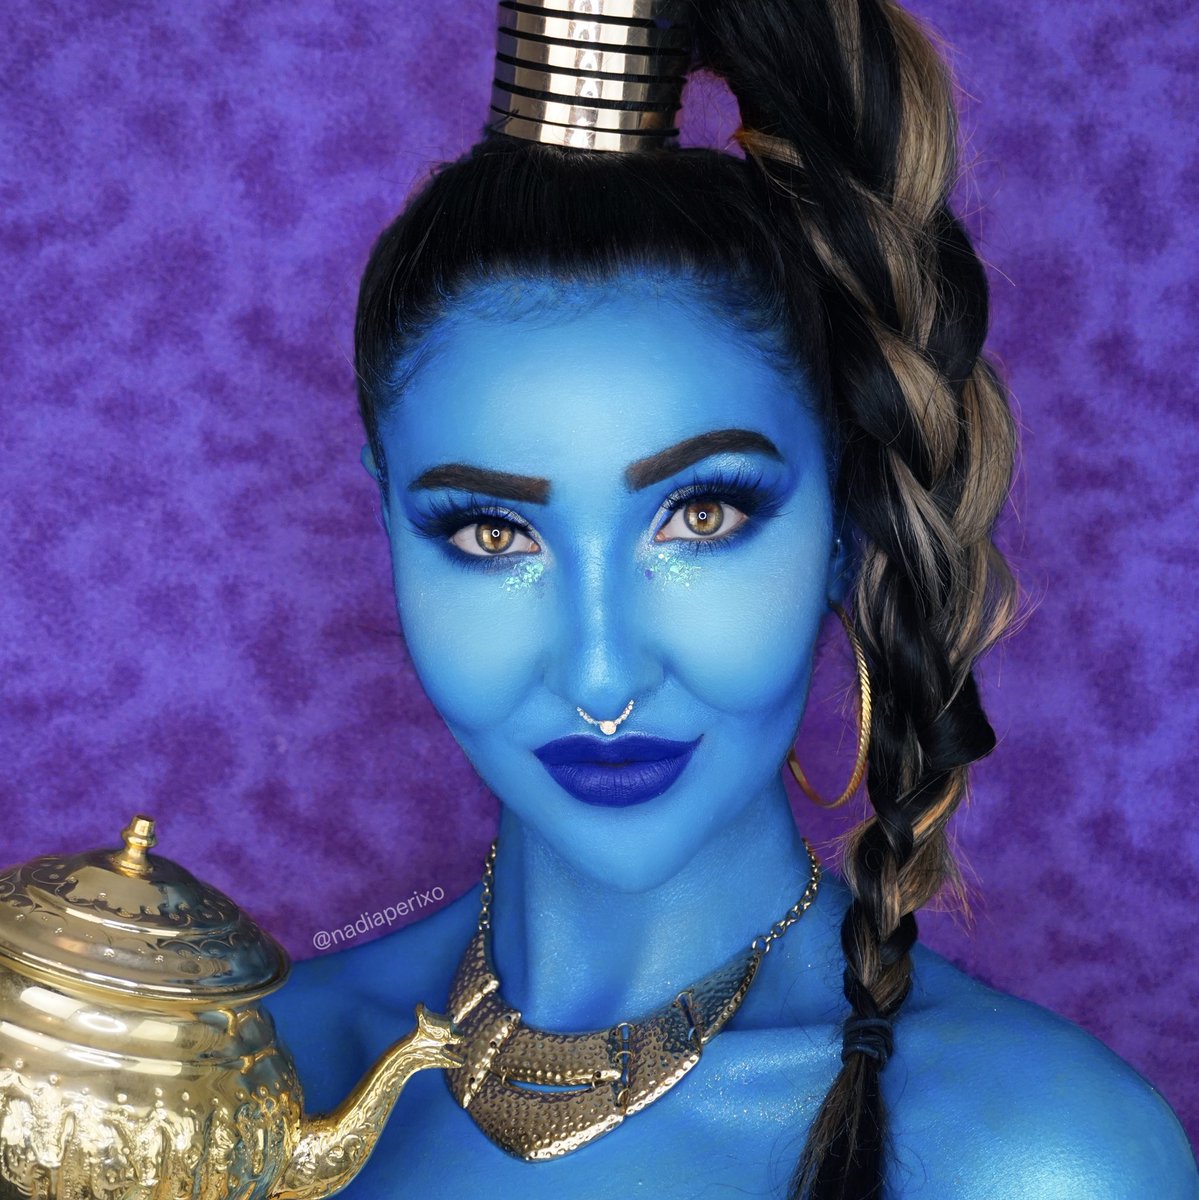 Nadia Peri on Twitter: "You ain't never had a like me! 🧞‍♂️💙 @jadapsmith Full Genie Tutorial here: https://t.co/pFJe213mR9 @ABHcosmetics loose in “Icy” for highlight on the face, and eyelid